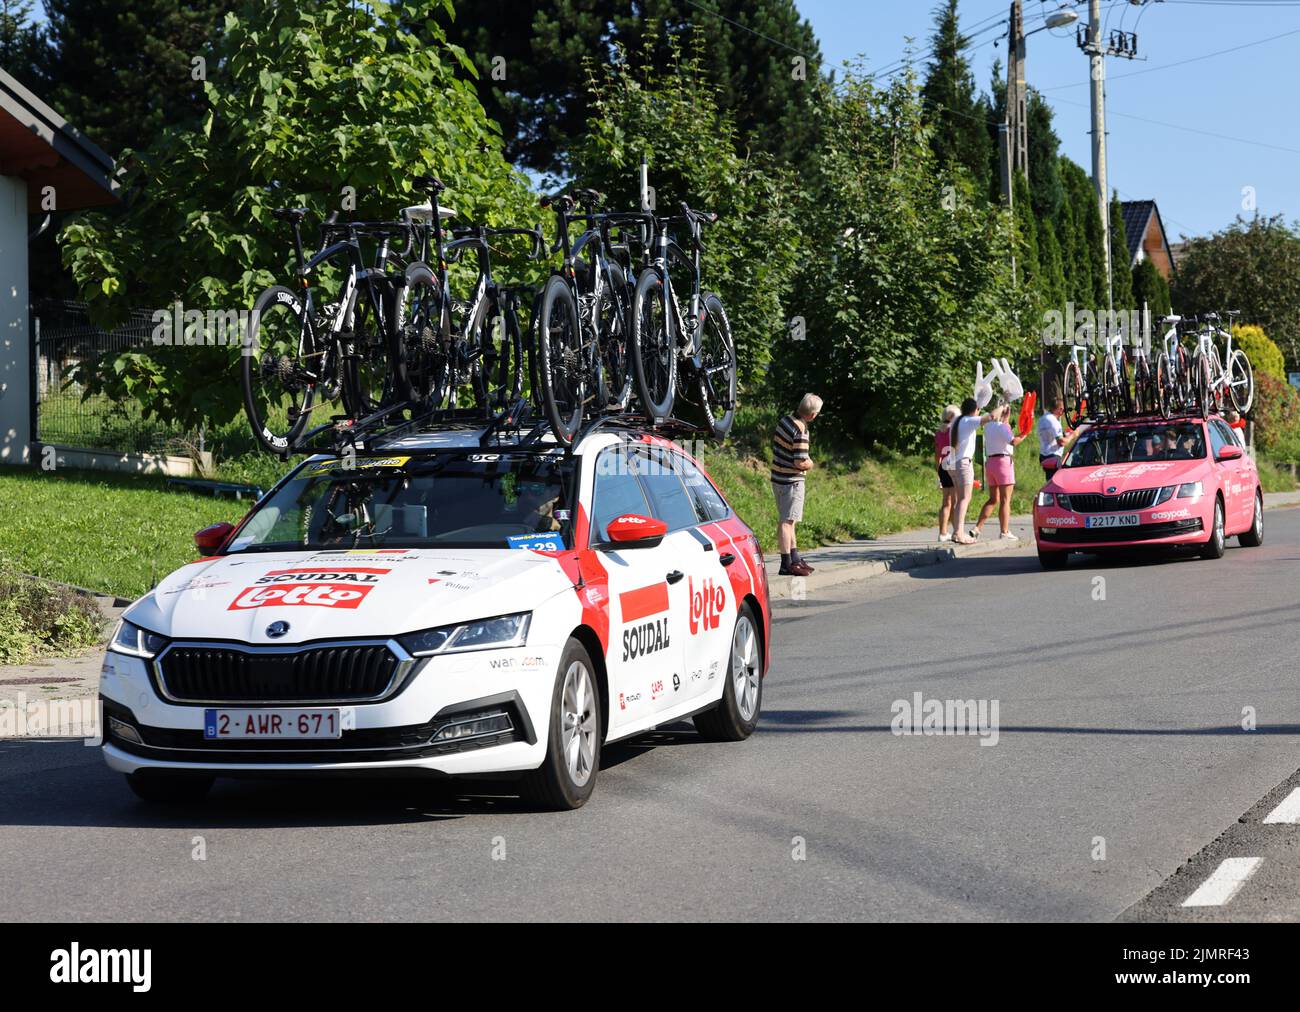 Krakow, Poland - August 5, 2022:  Lotto Soudal Team vehicle on the route of Tour de Pologne UCI – World Tour, stage 7 Skawina - Krakow. The biggest cycling event in Eastern Europe. Stock Photo